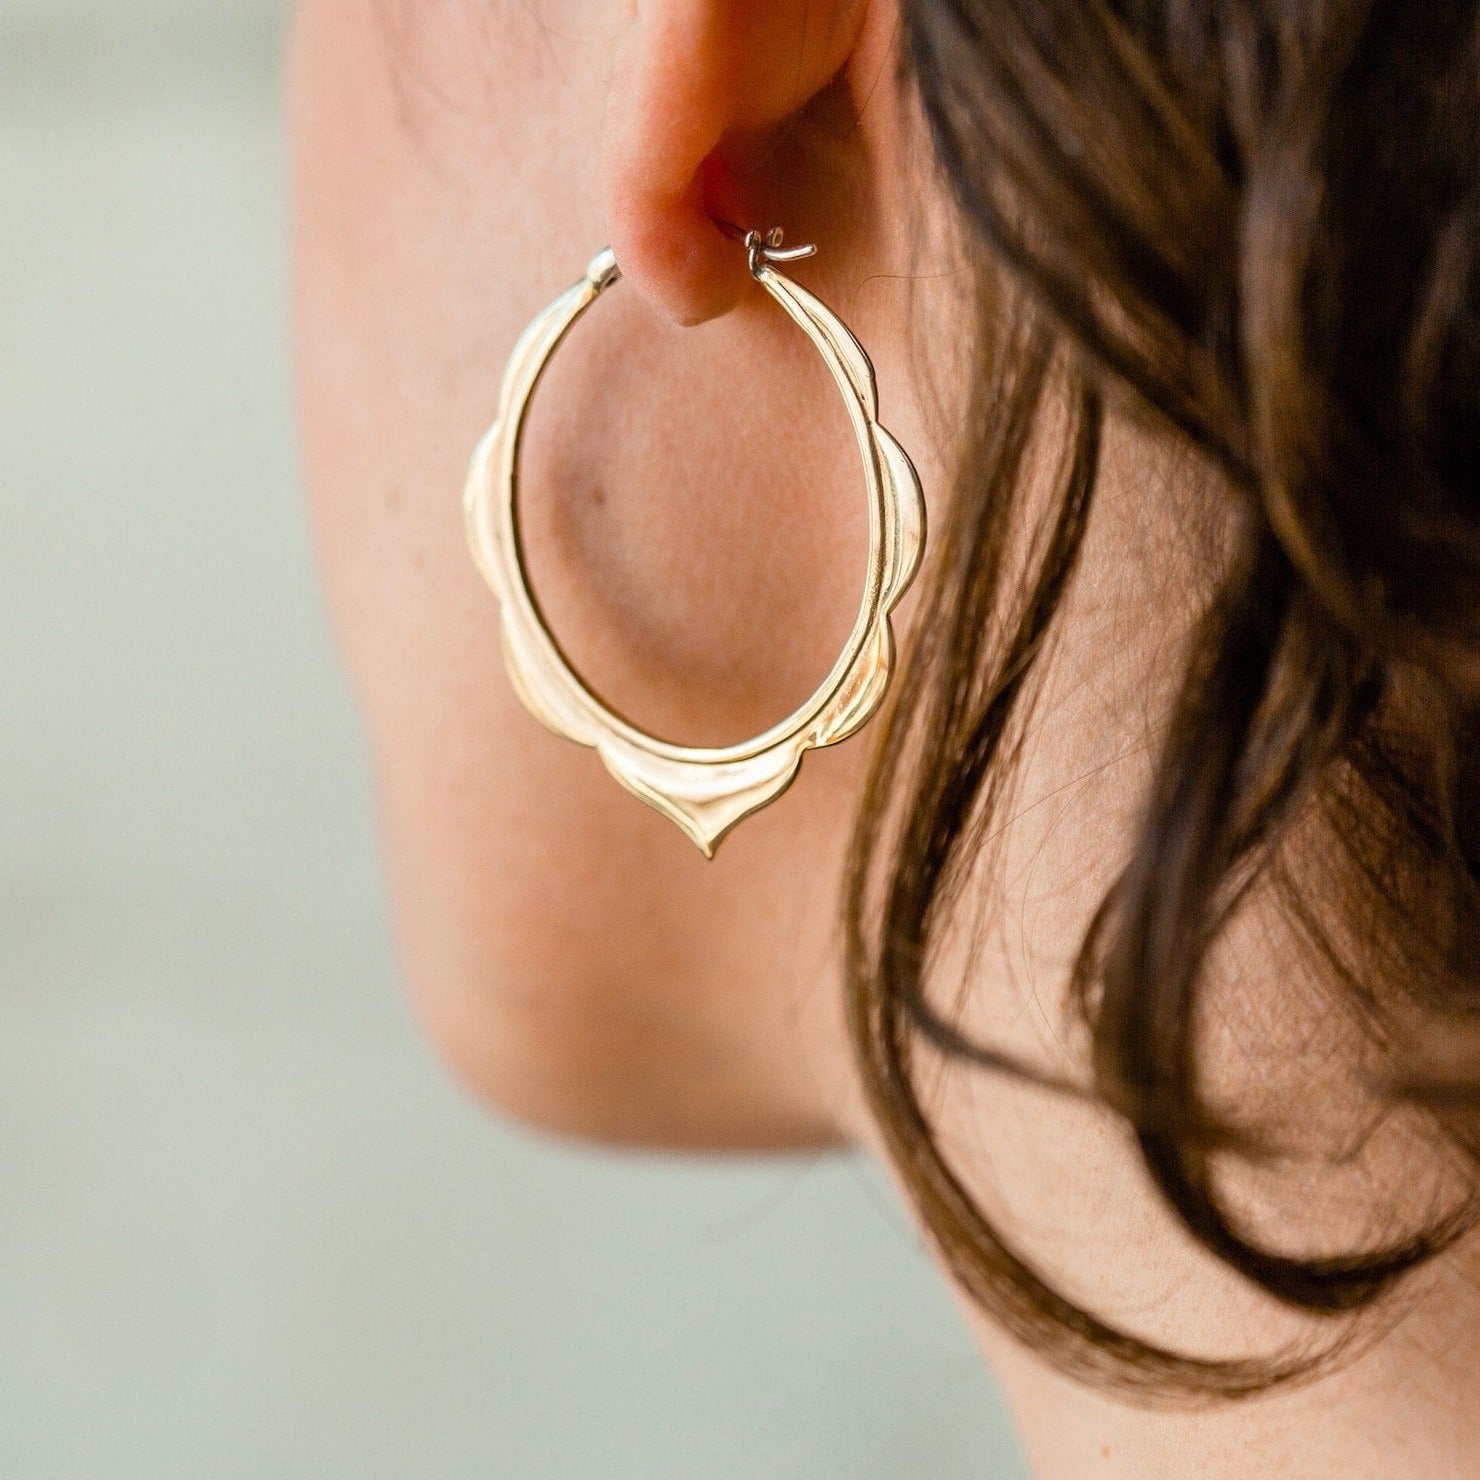 Moroccan Hoop Earrings Large Brass With Silver Posts